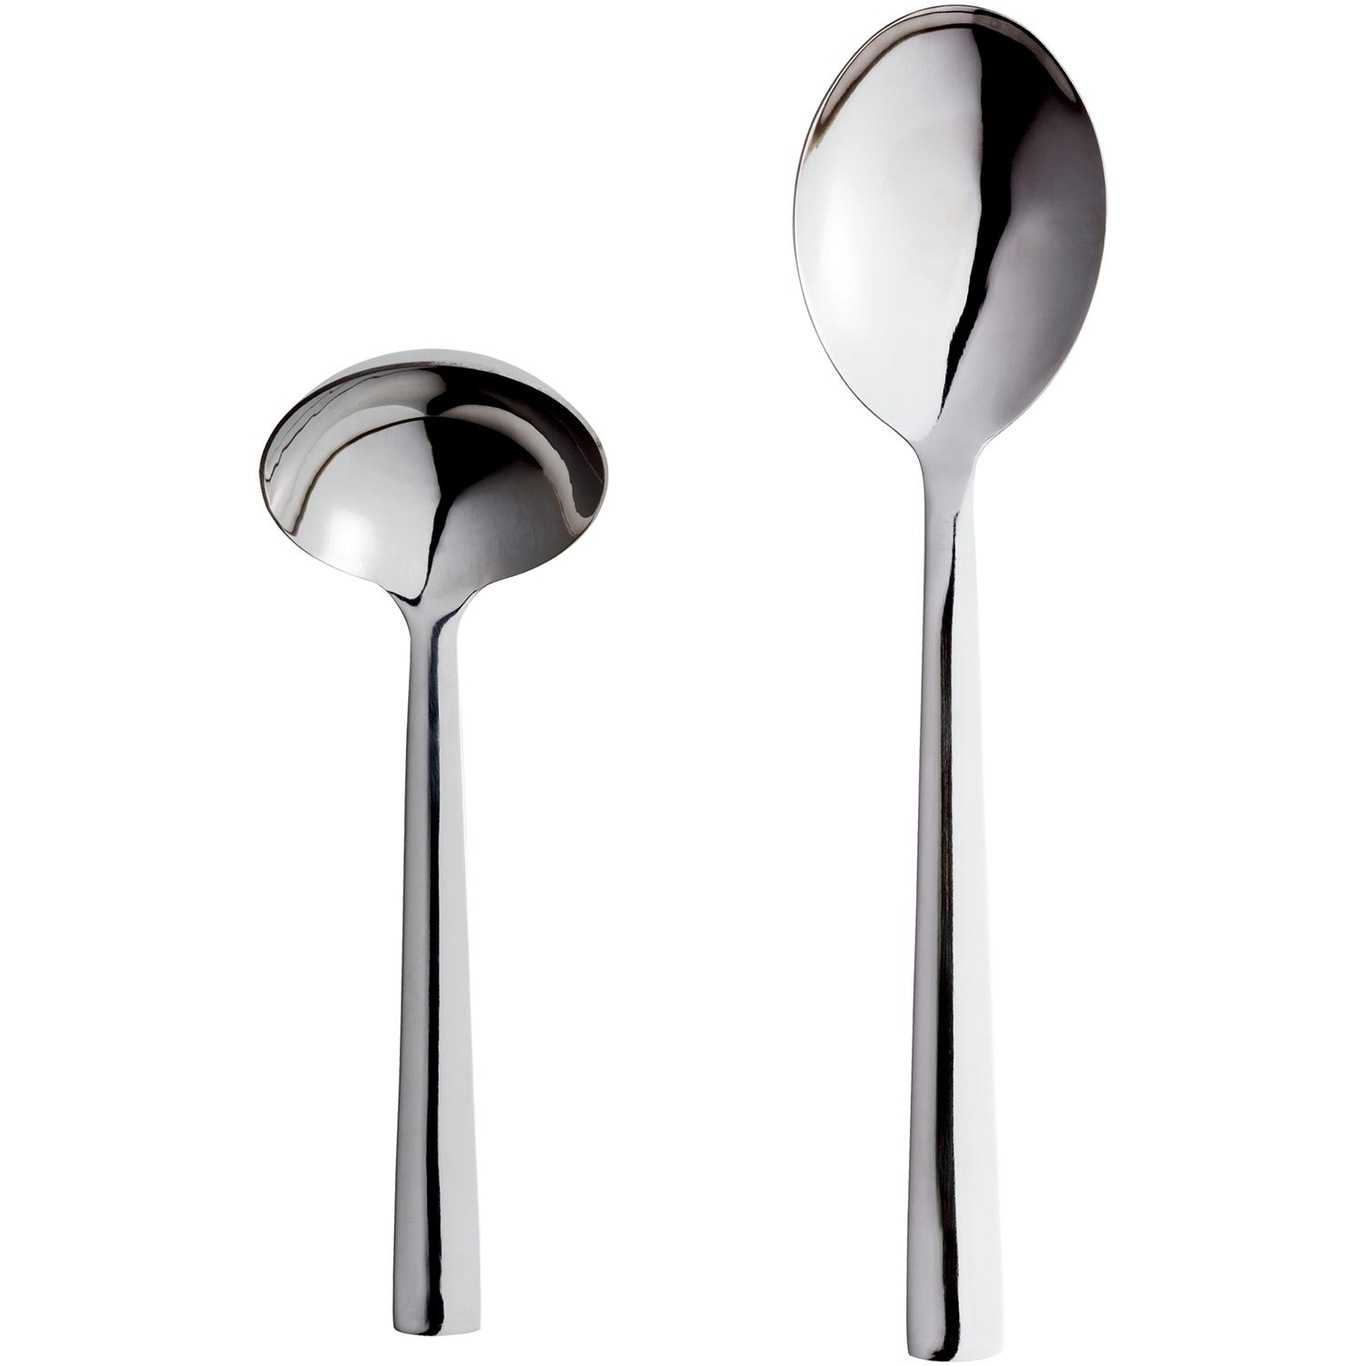 Raw Sauce Ladle & Serving Spoon, Stainless Steel